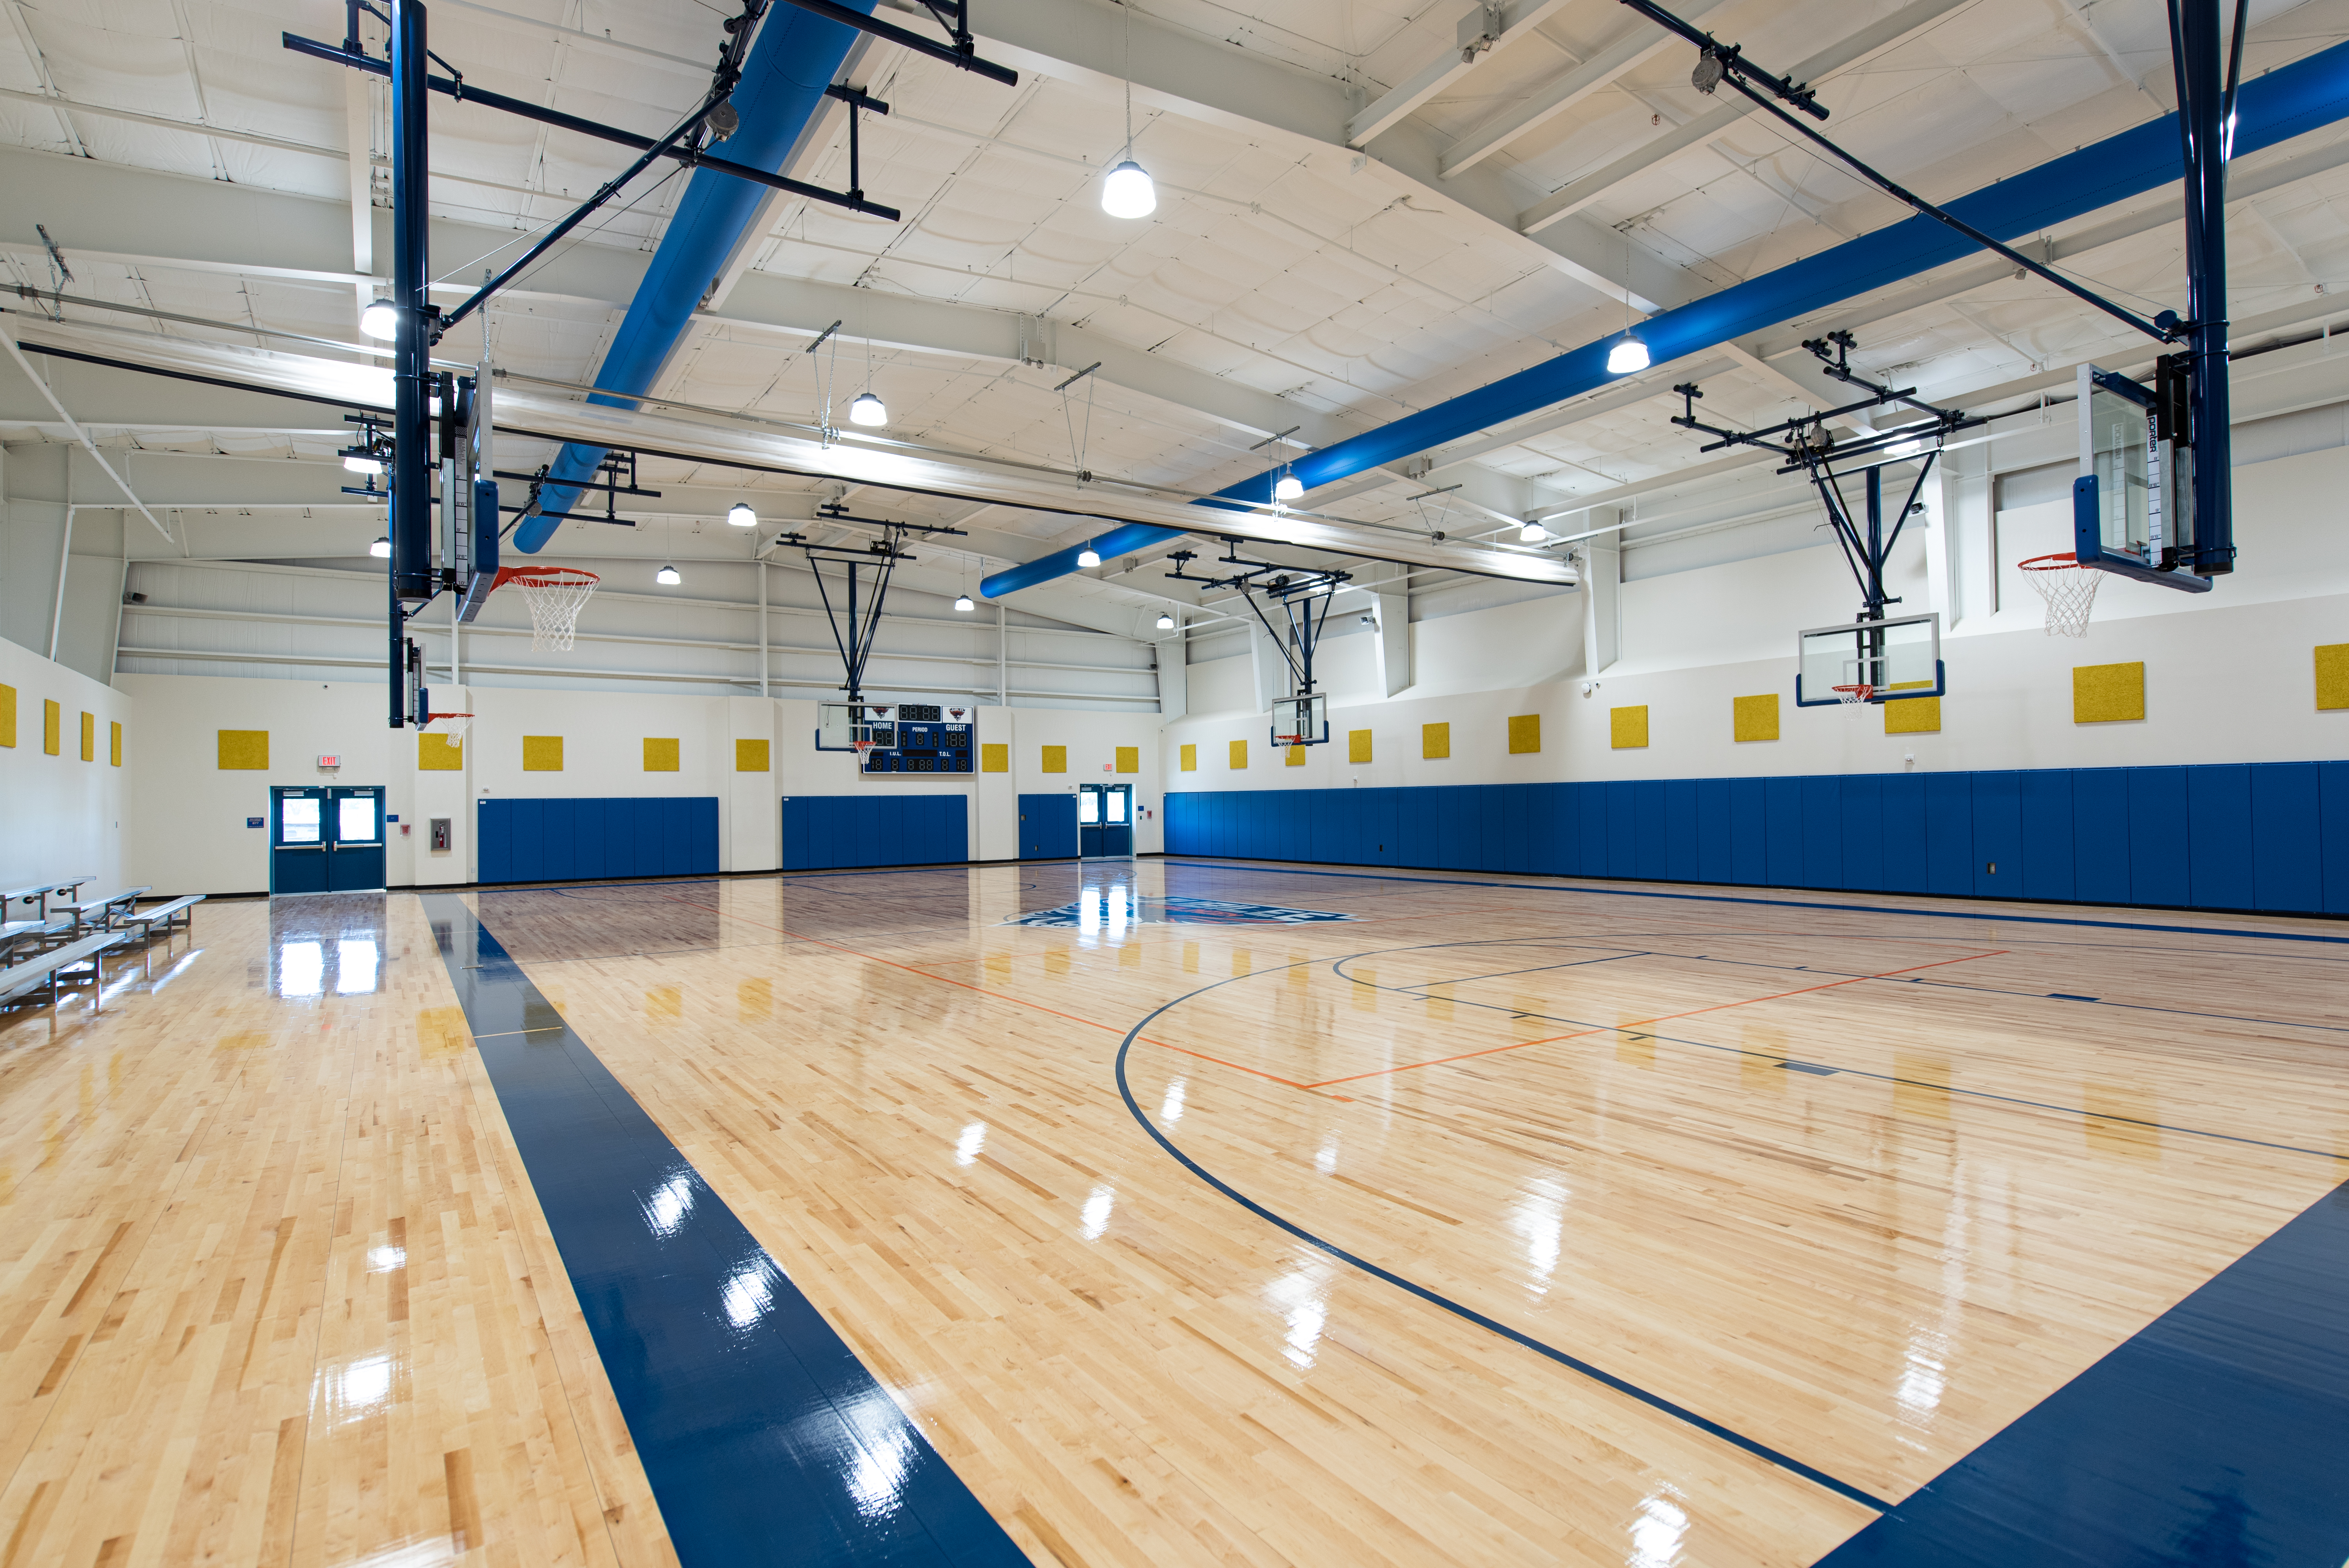 School gym built in college station, texas by Performance Charter School Development